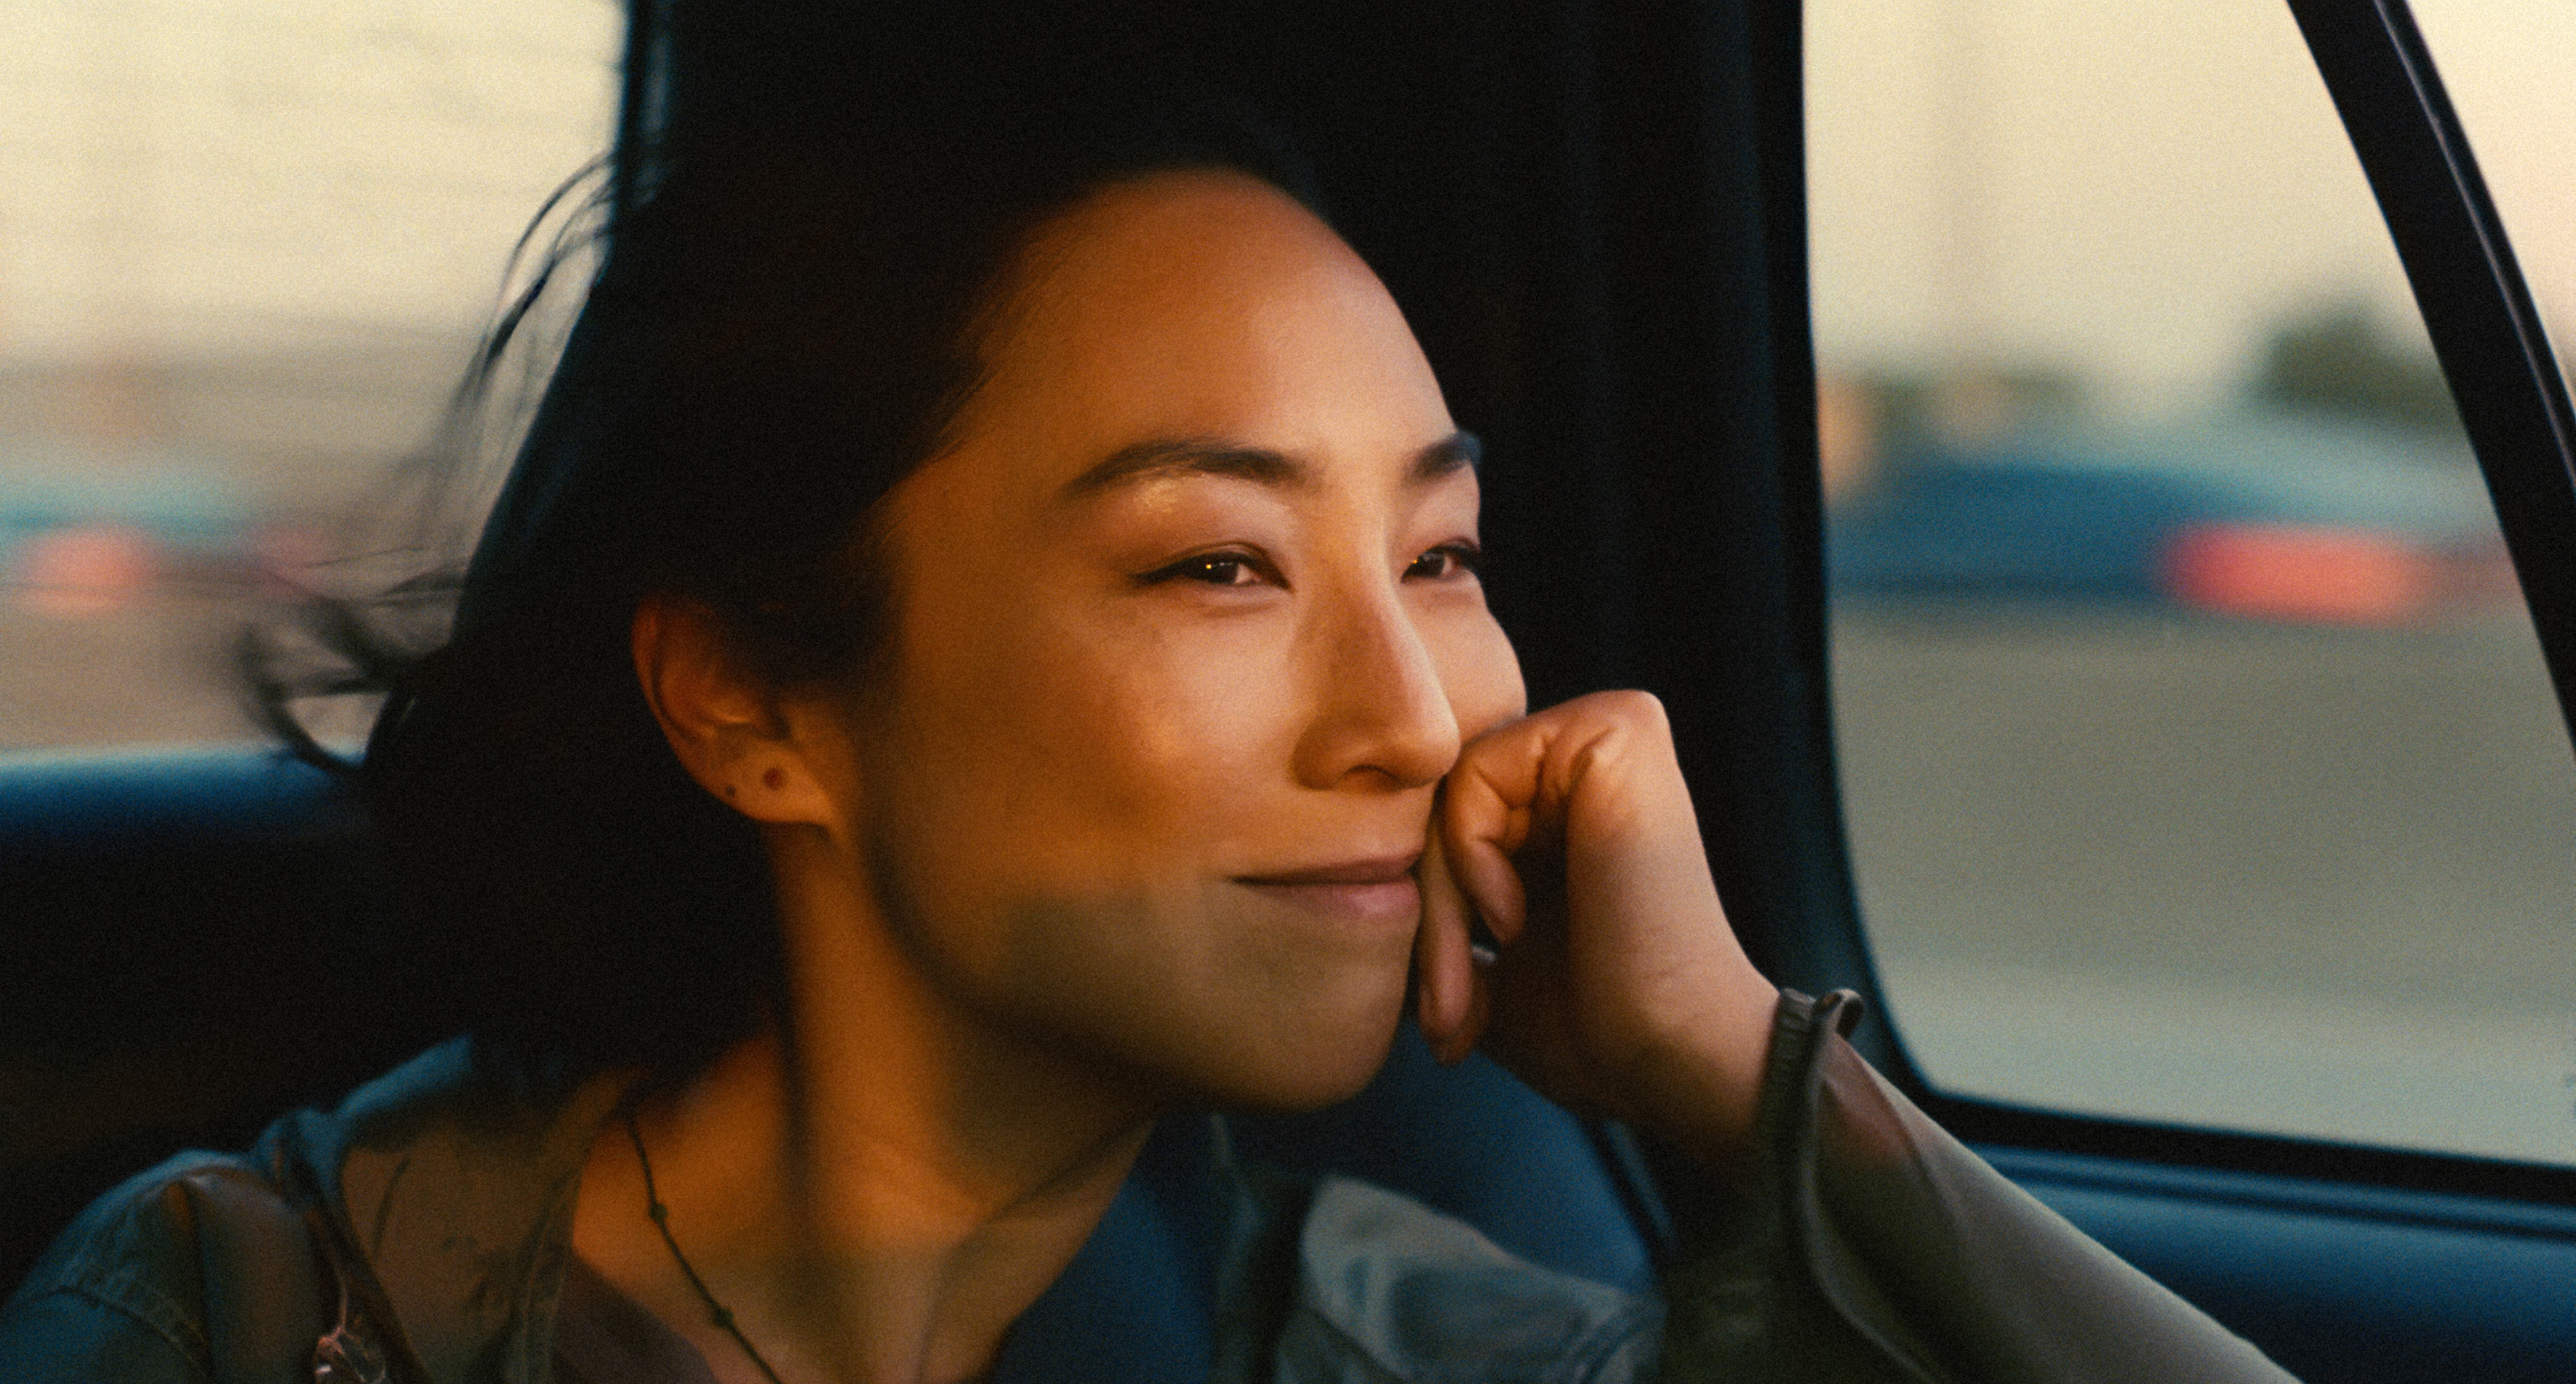 A still from the film “Past Lives” in which Greta Lee sits in a car, smiling, while resting her head on her hand